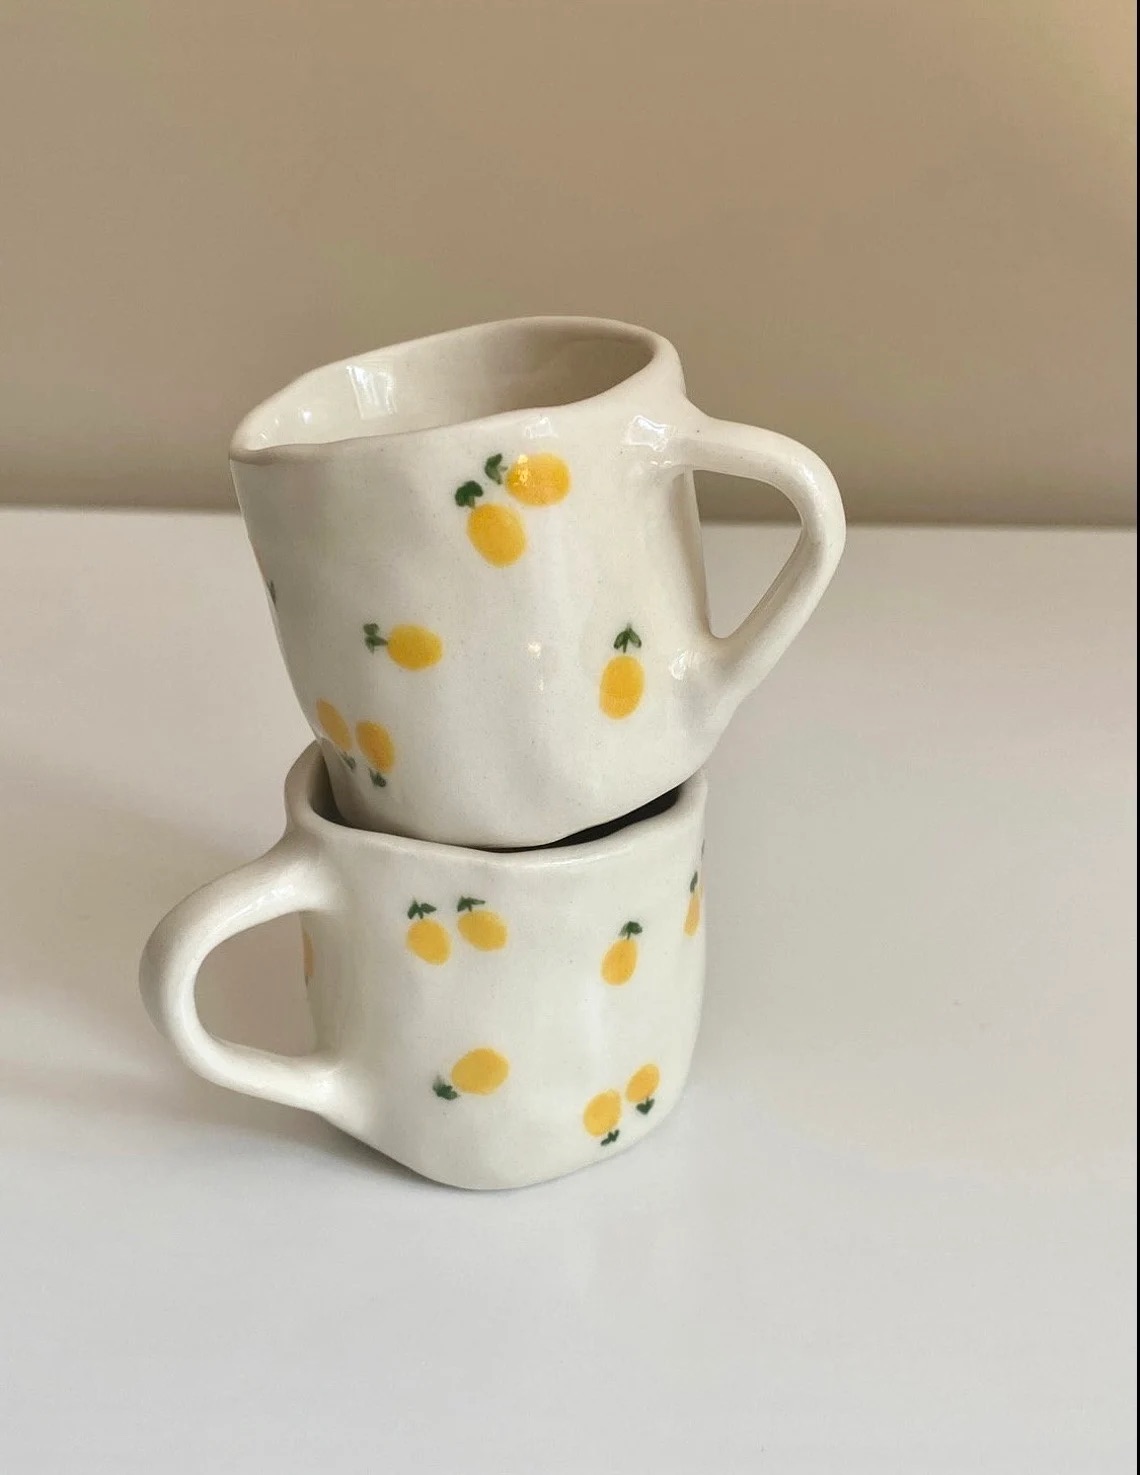 Two white ceramic cups with yellow fruit patterns stacked on a table against a plain background.